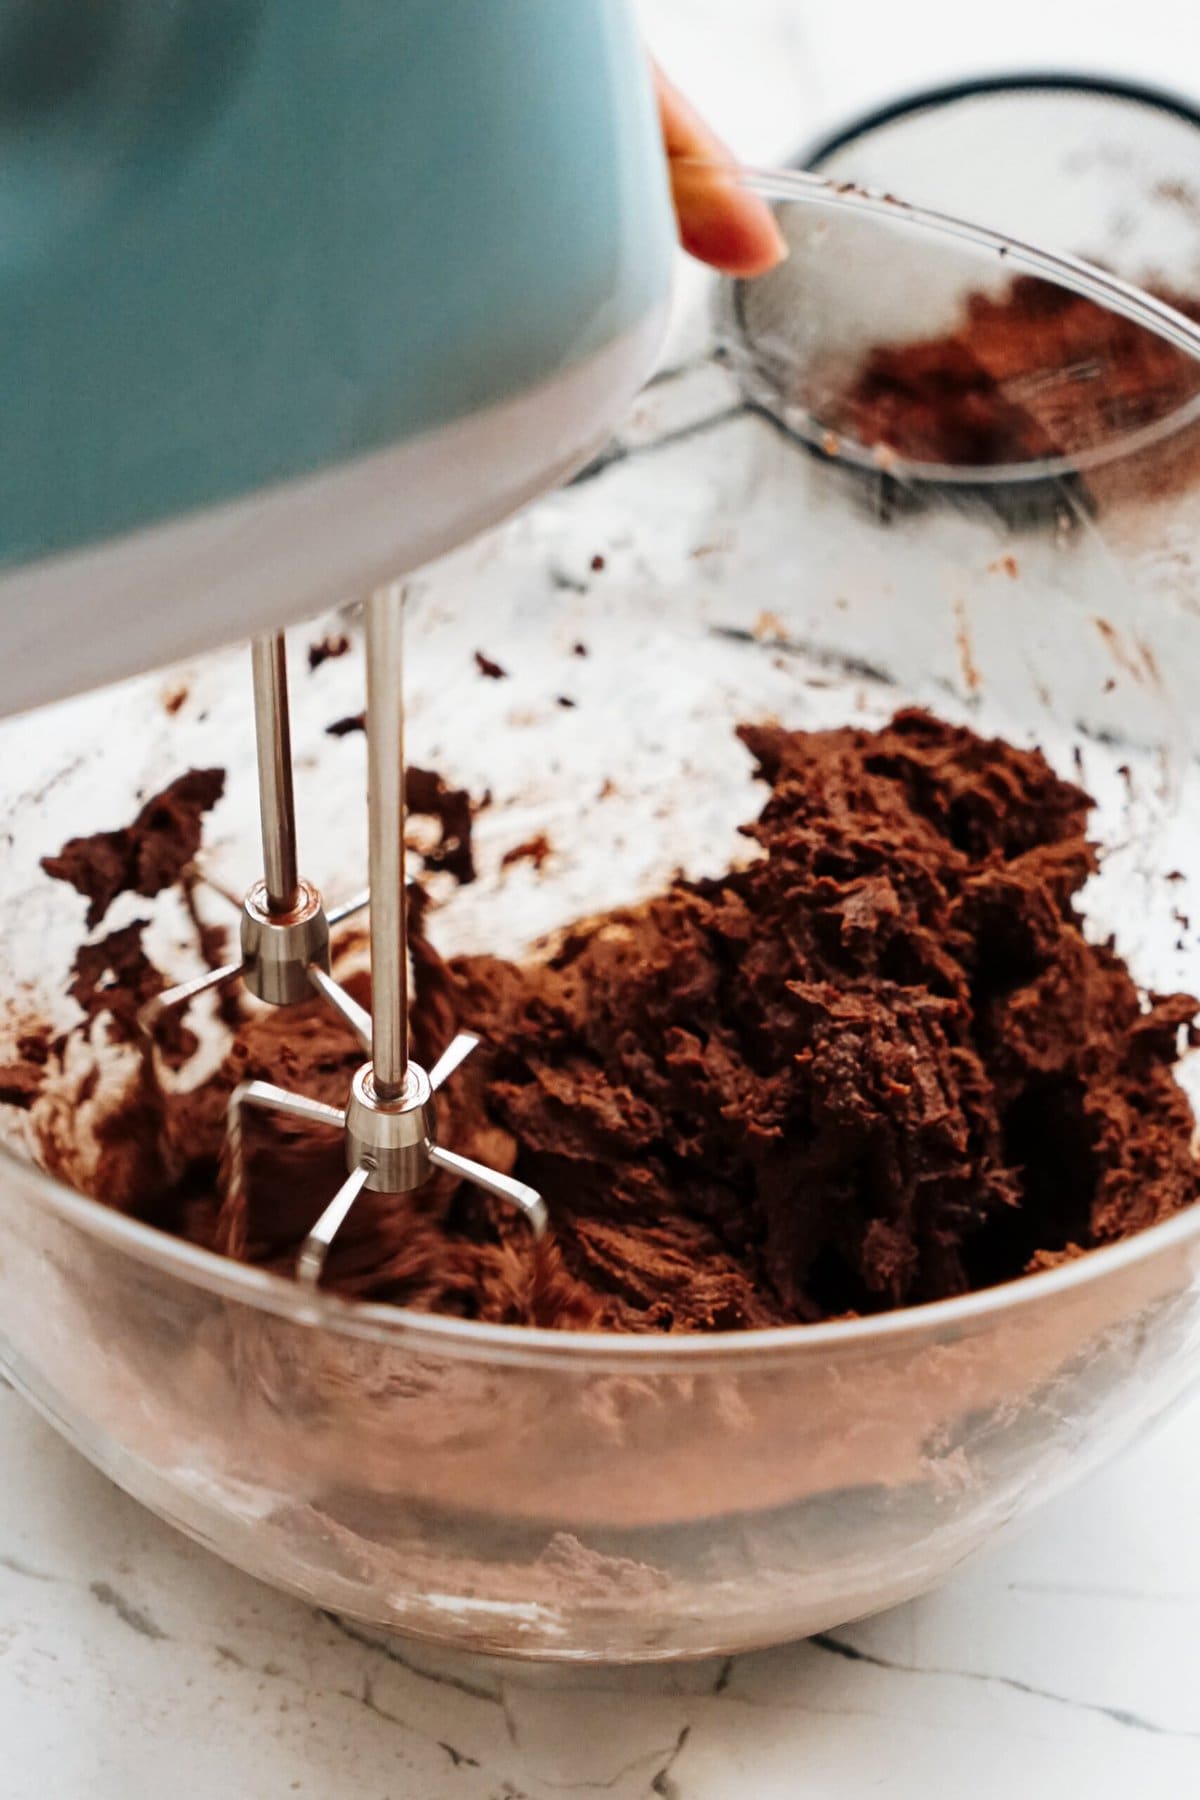 A person mixing chocolate in a bowl with a mixer.